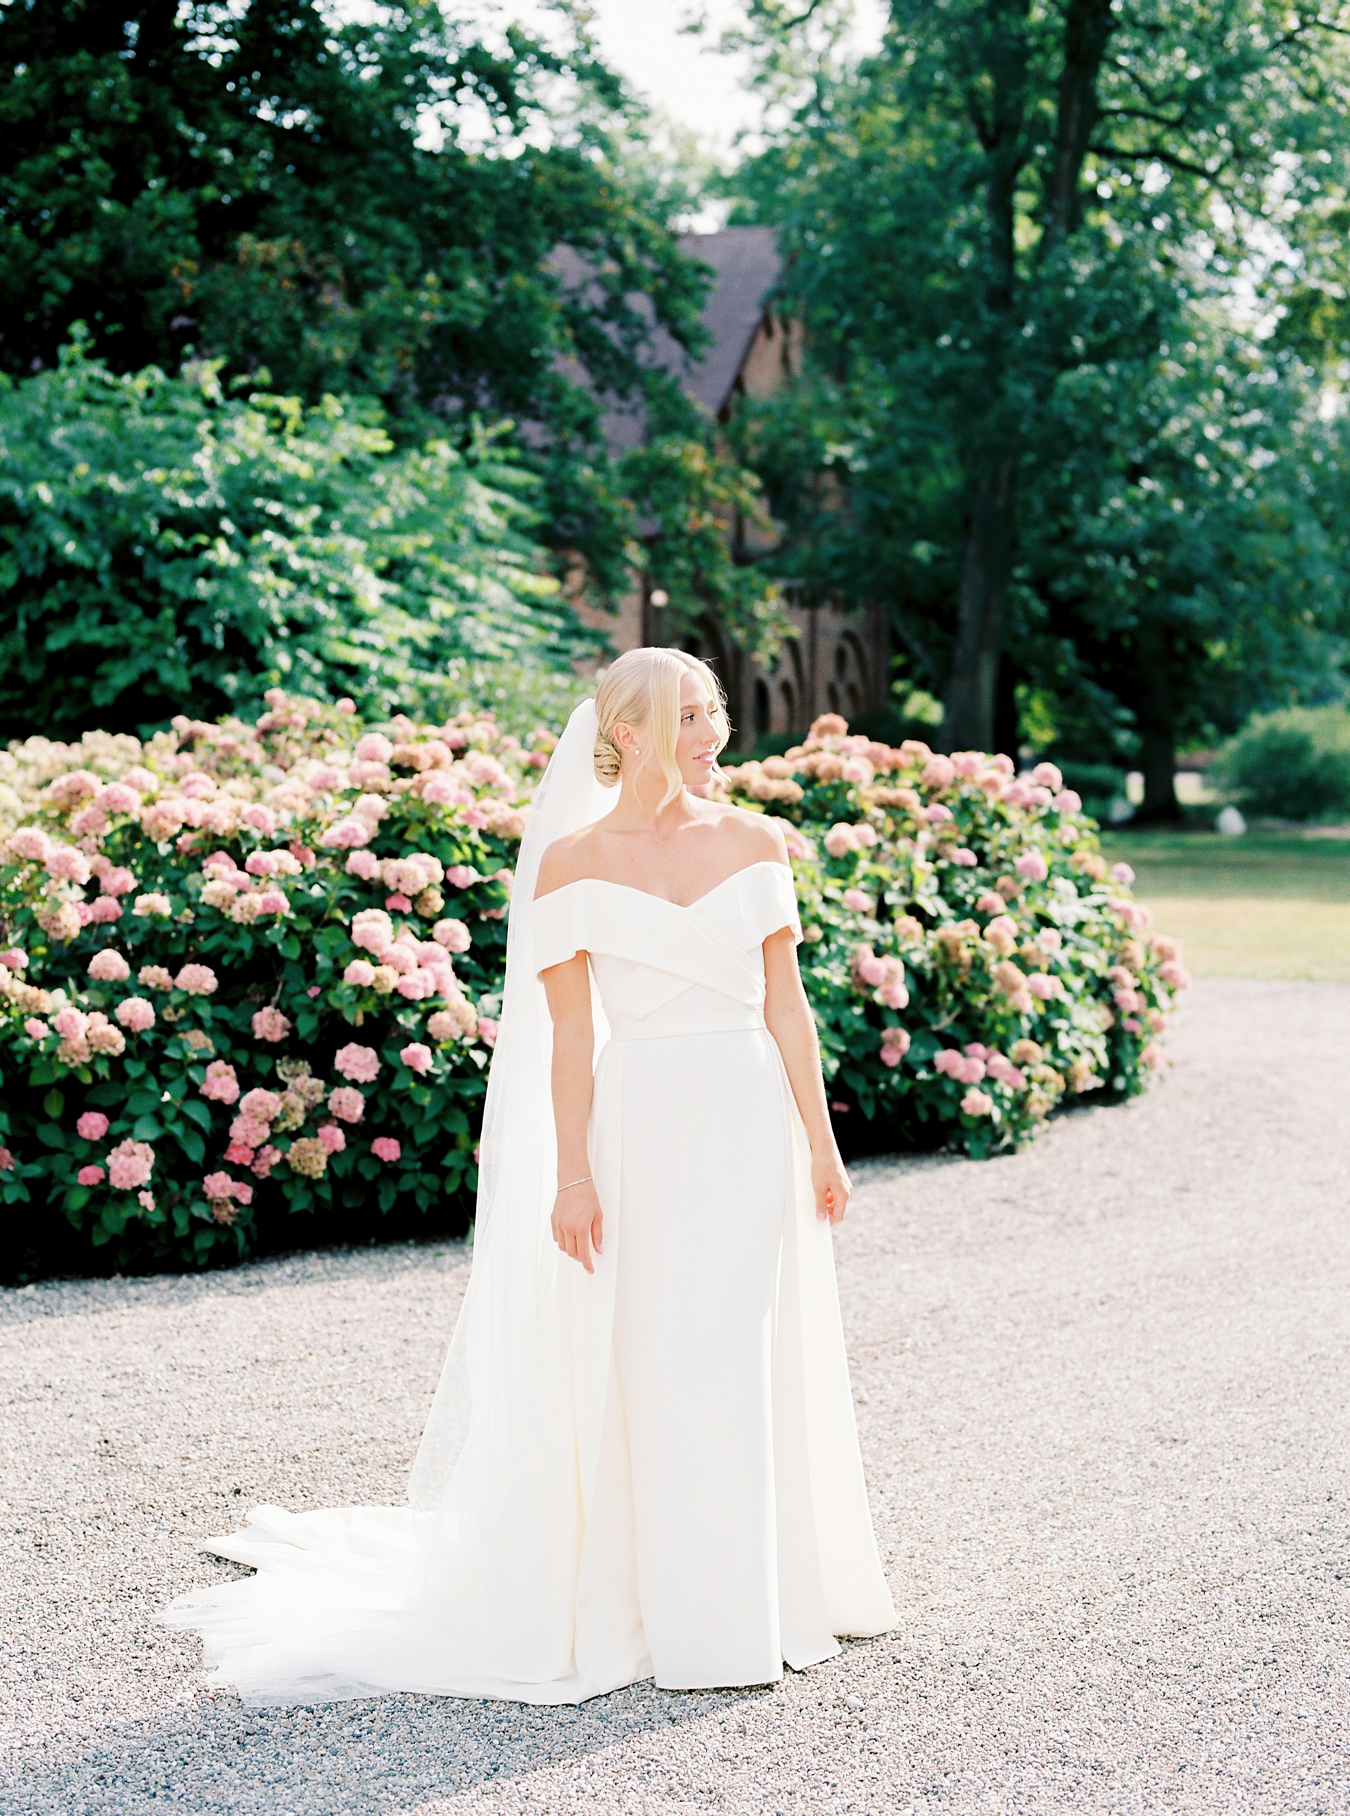 The bride standing infront of a large floral hedge with pink flowers at Jordberga Skåne